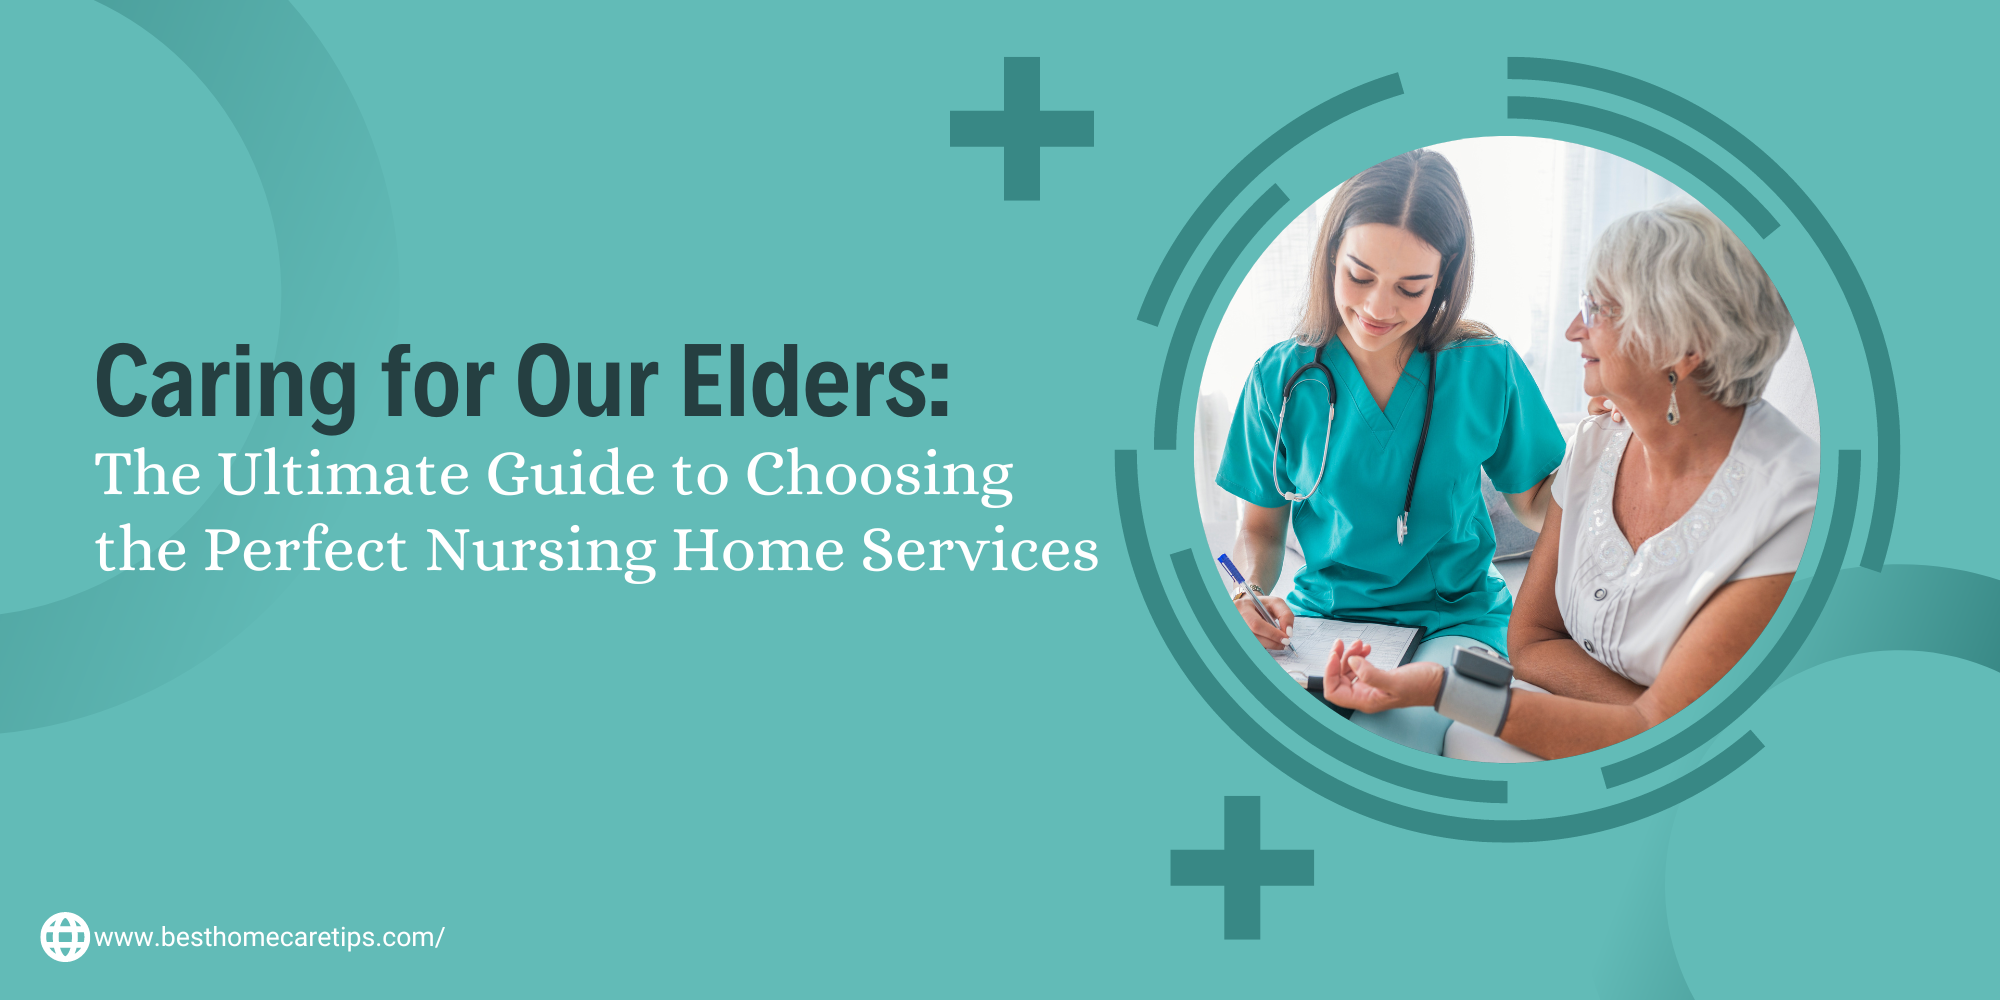 Caring for Our Elders- The Ultimate Guide to Choosing the Perfect Nursing Home Services